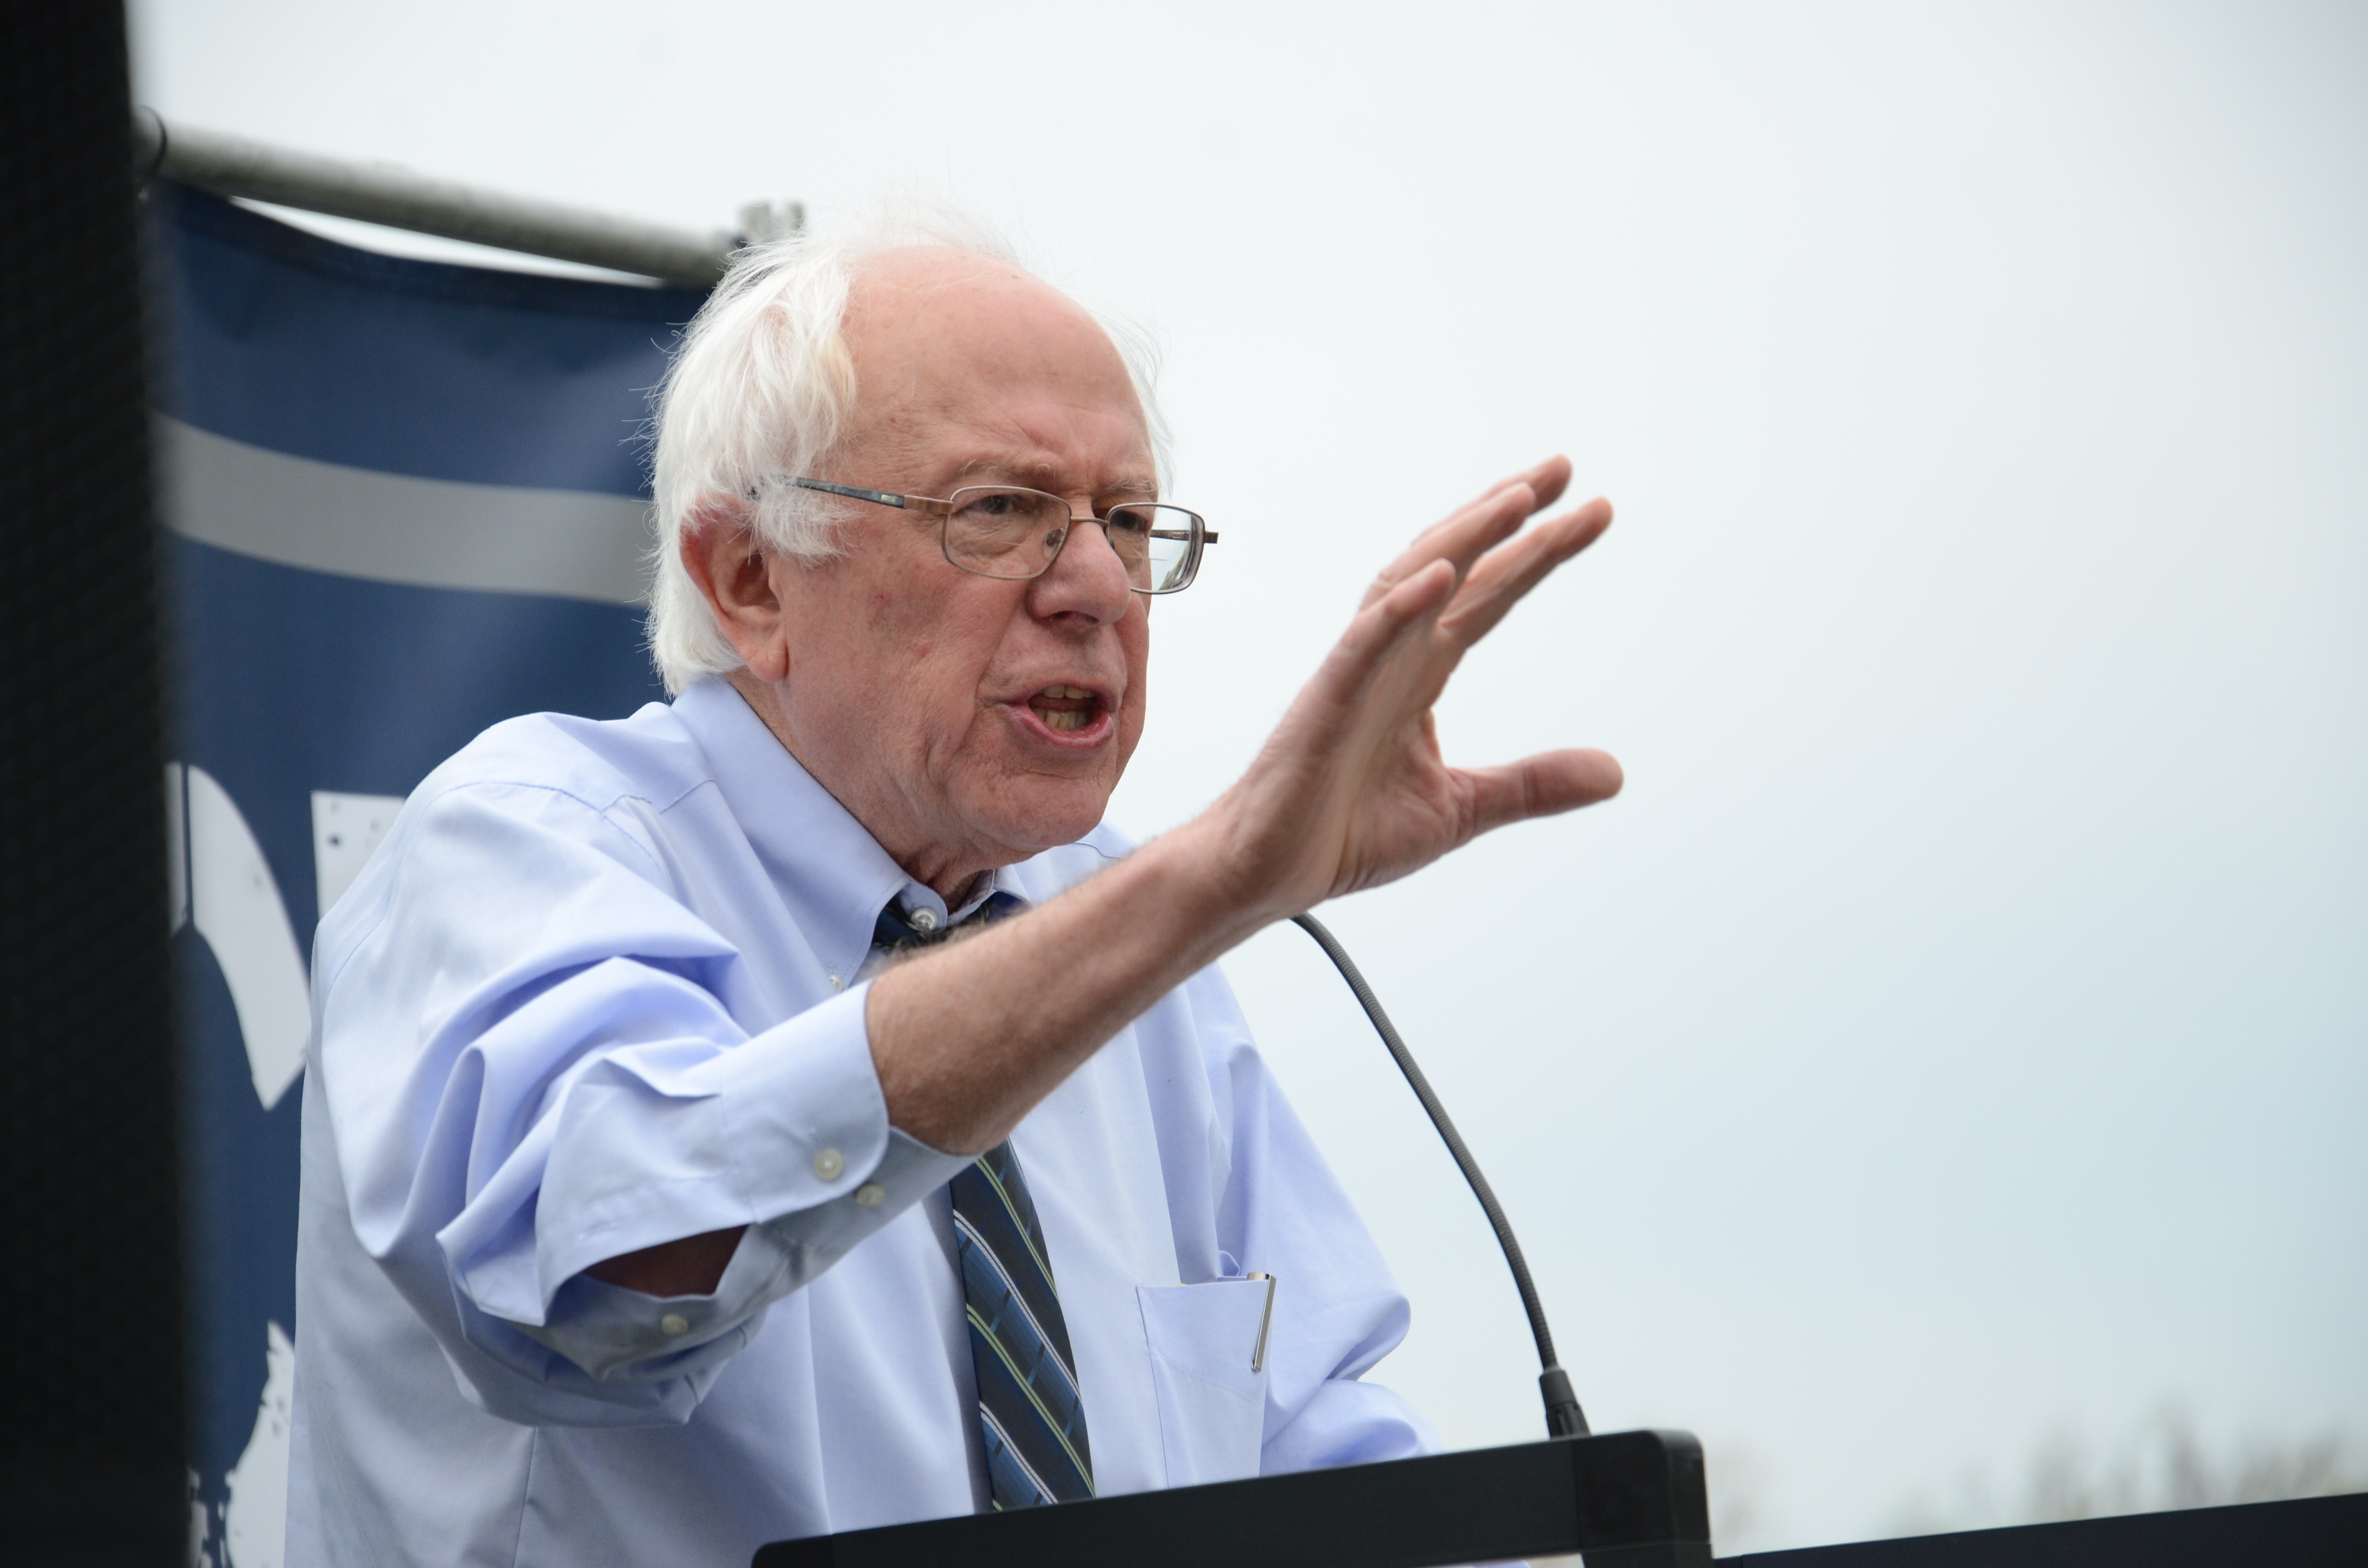 Bernie Sanders' Citizen Eco-Drive is perfect for a people's politician